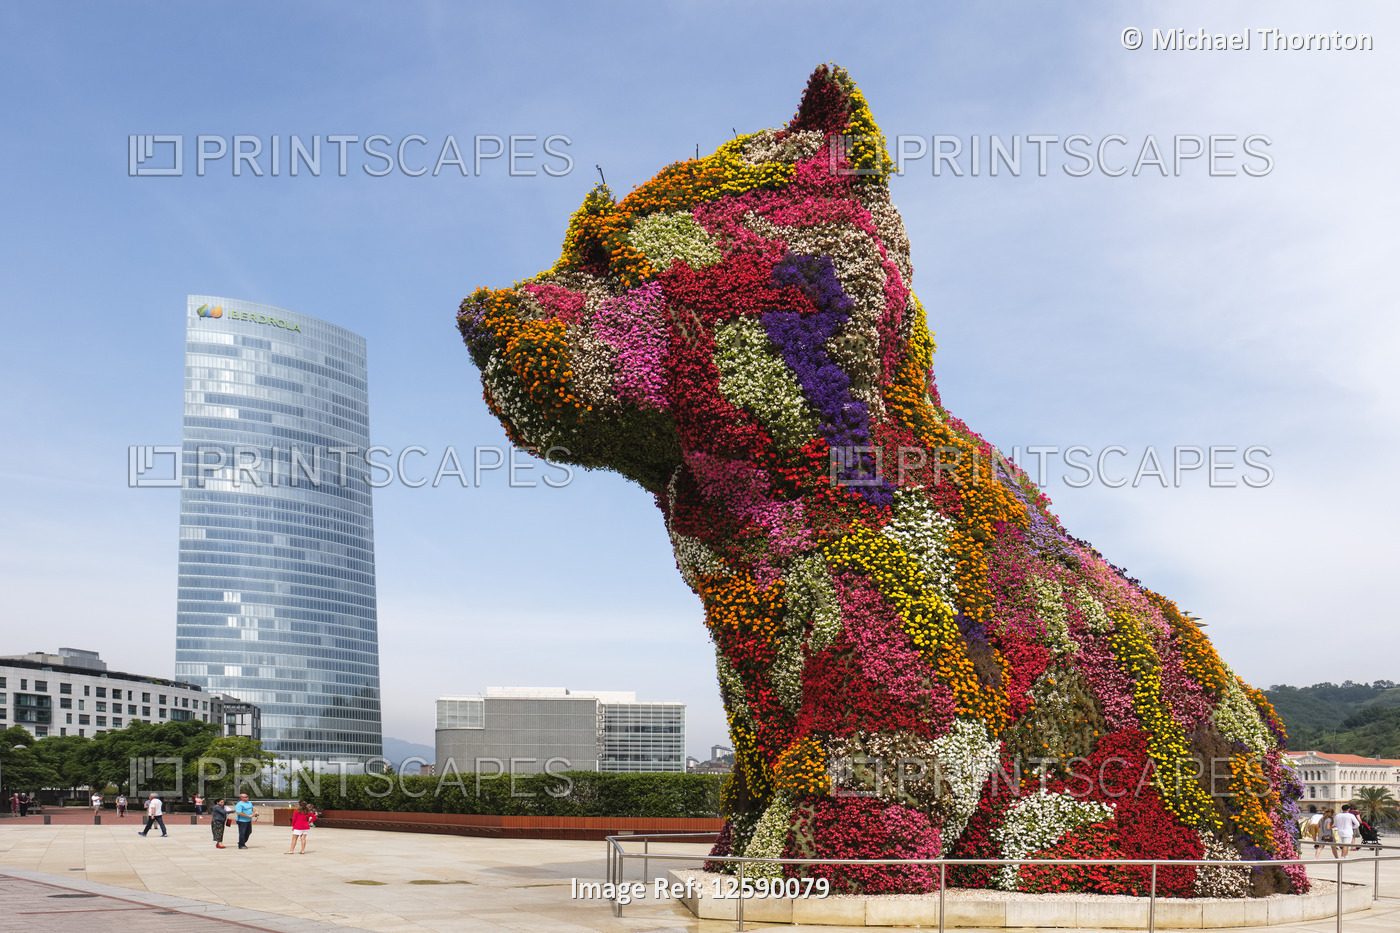 The Puppy by Jeff Koons, Iberdrola Tower in background, Guggenheim Museum, ...